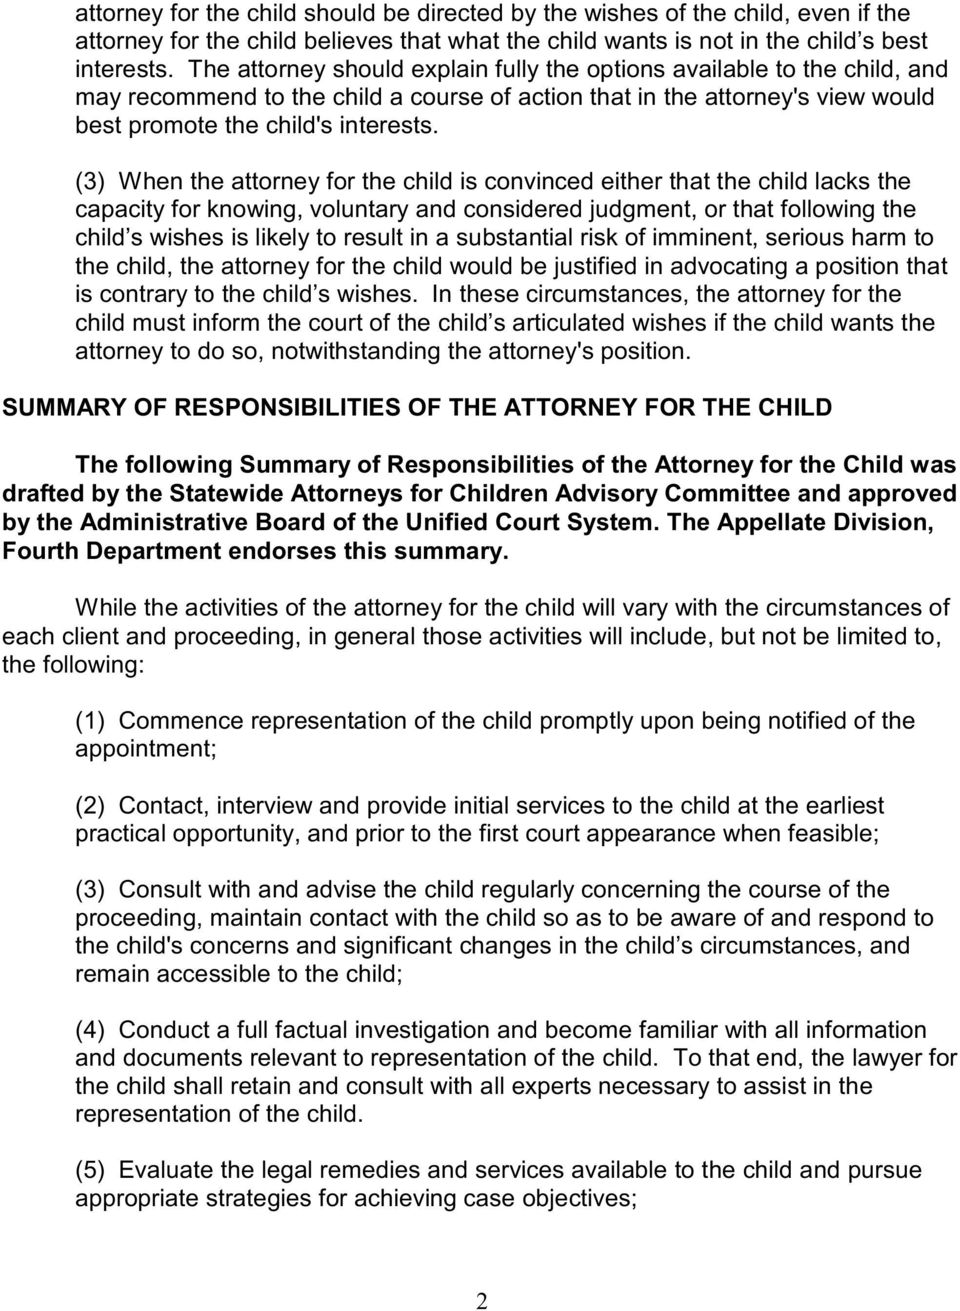 (3) When the attorney for the child is convinced either that the child lacks the capacity for knowing, voluntary and considered judgment, or that following the child s wishes is likely to result in a